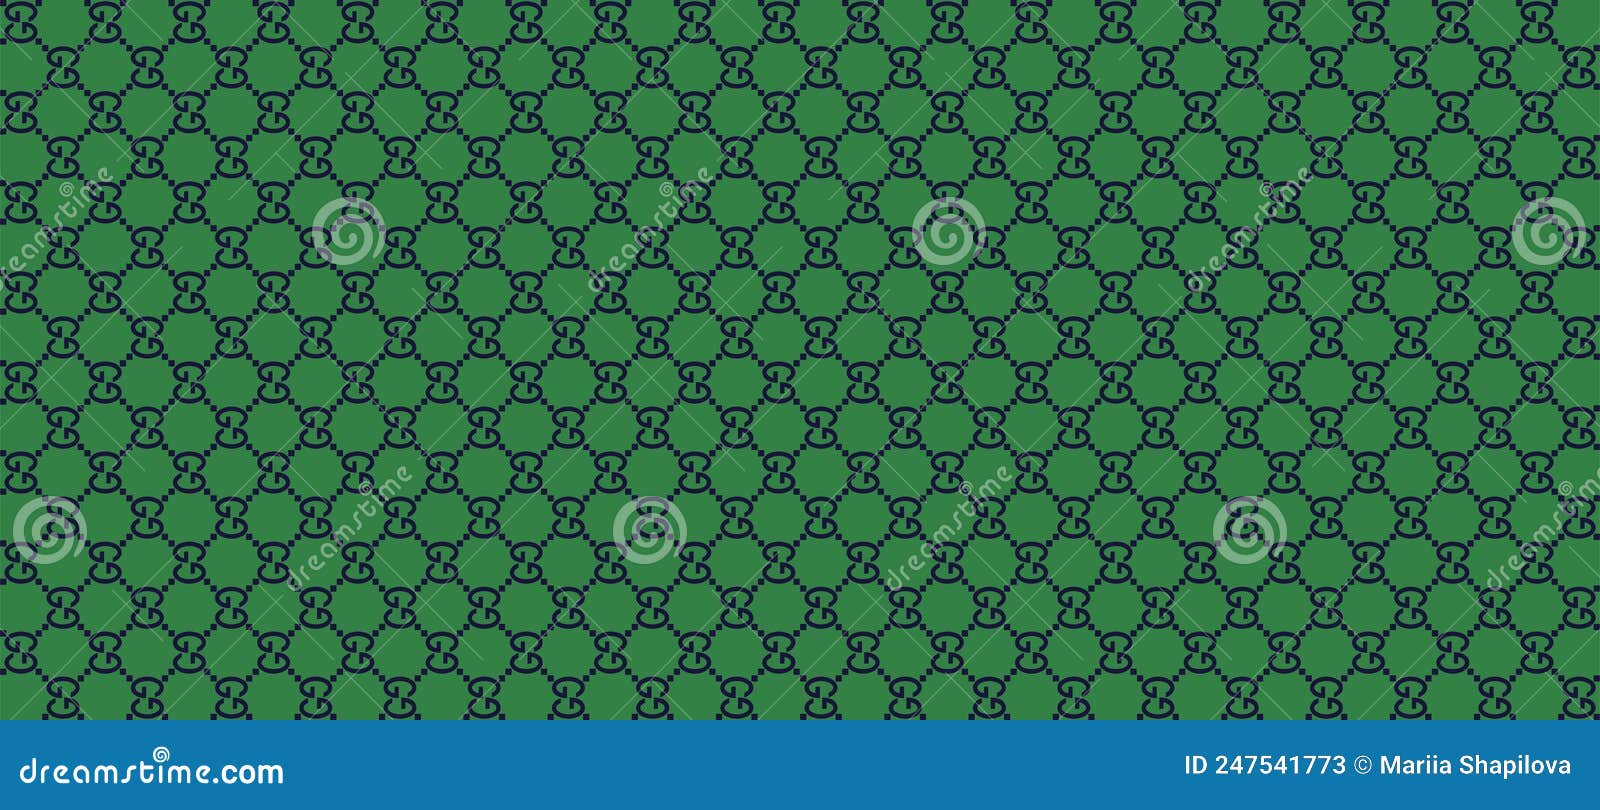 Official Gucci Pattern in Green Stock Vector - Illustration of wallpaper,  shop: 247541773